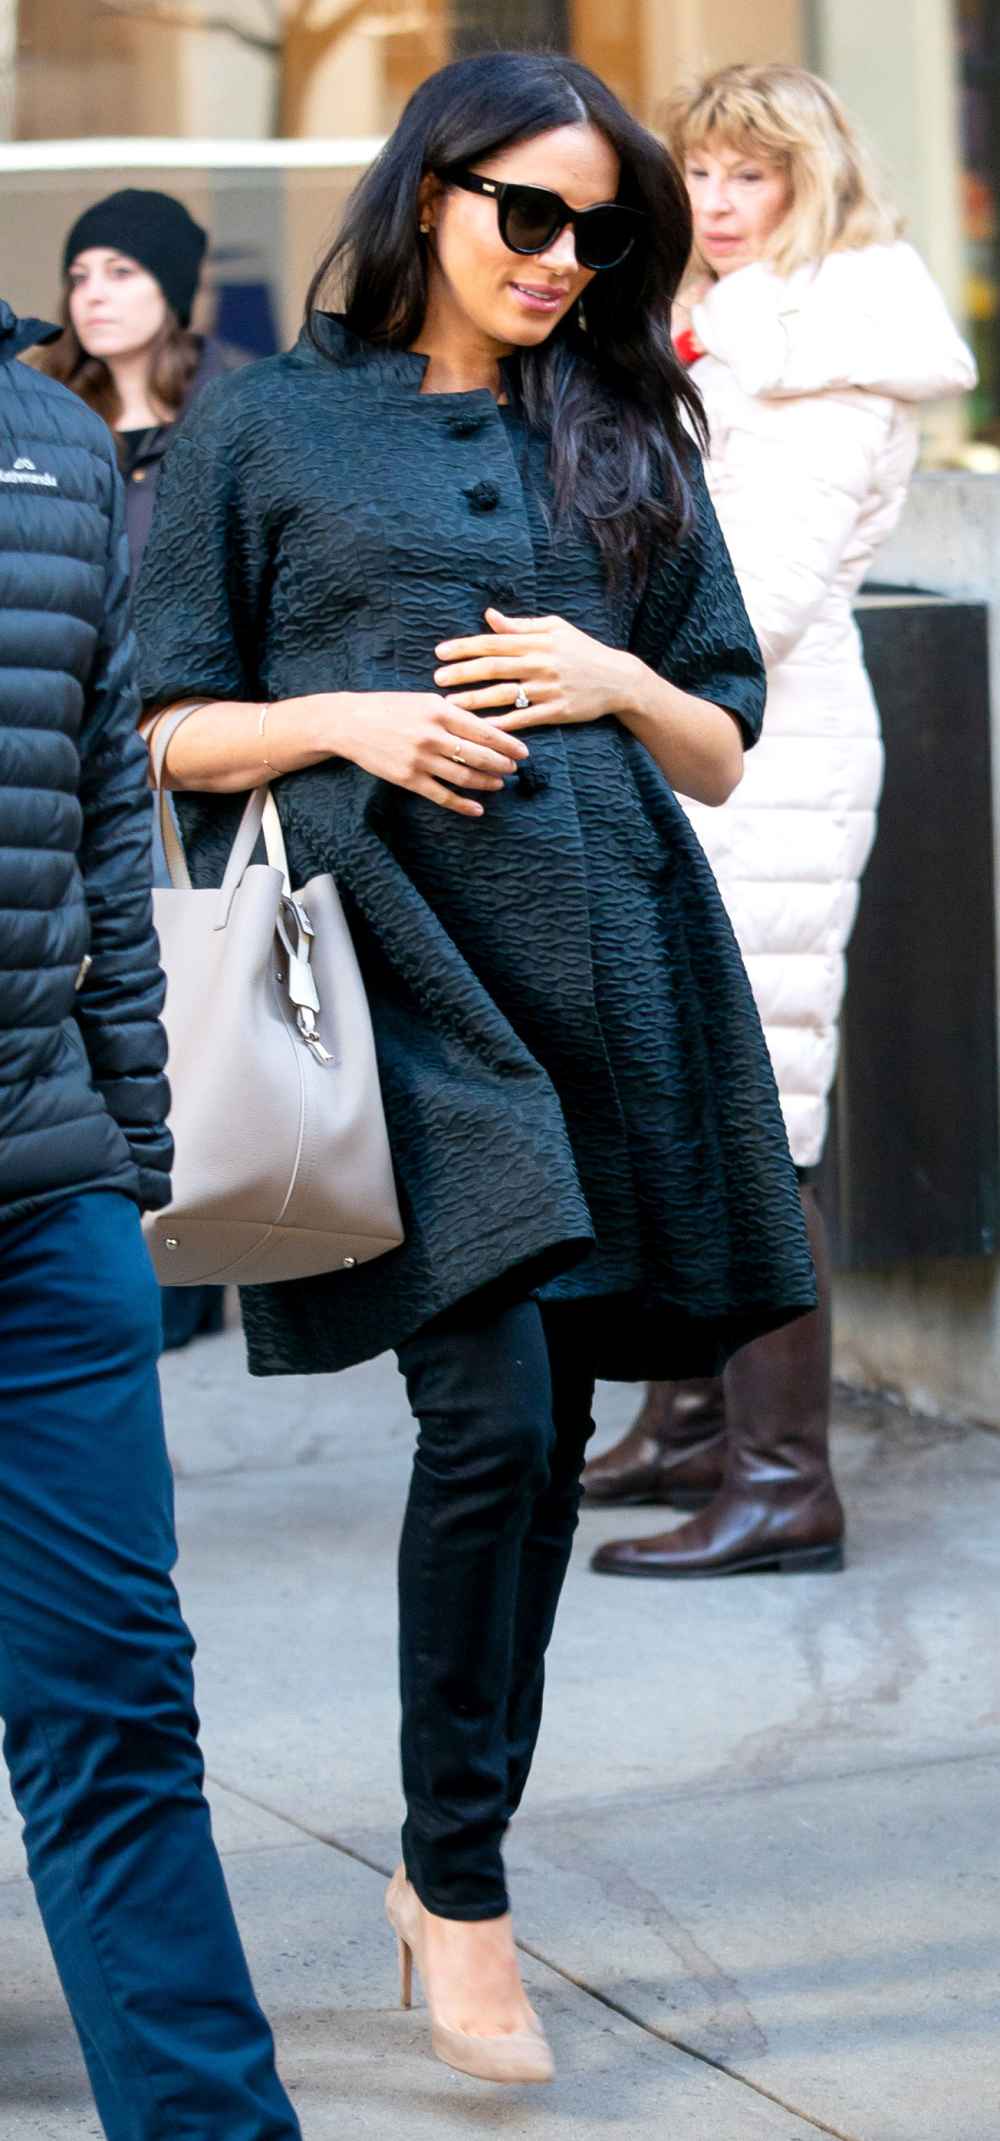 Inside Duchess Meghan's NYC Baby Shower: Details!